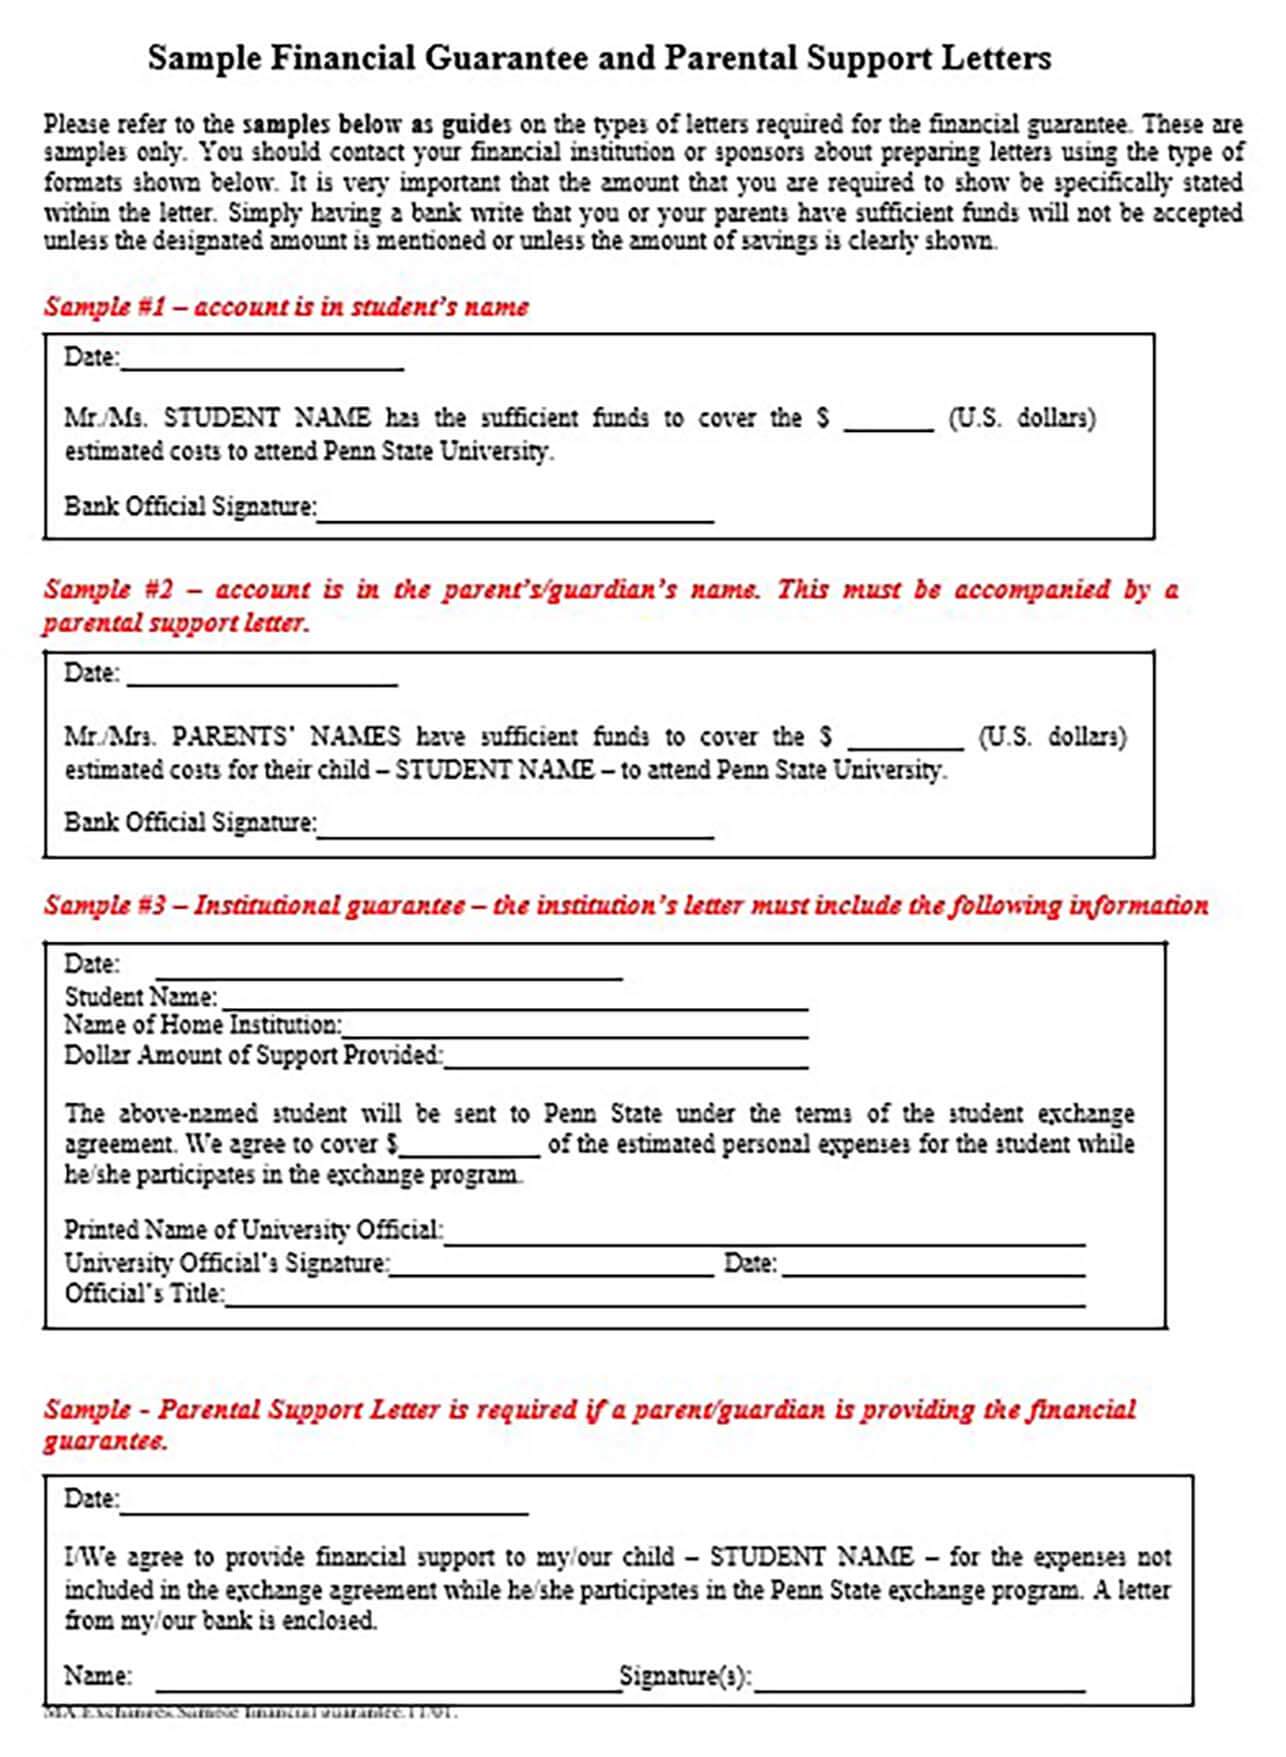 Guarantee Letter of Support Sample